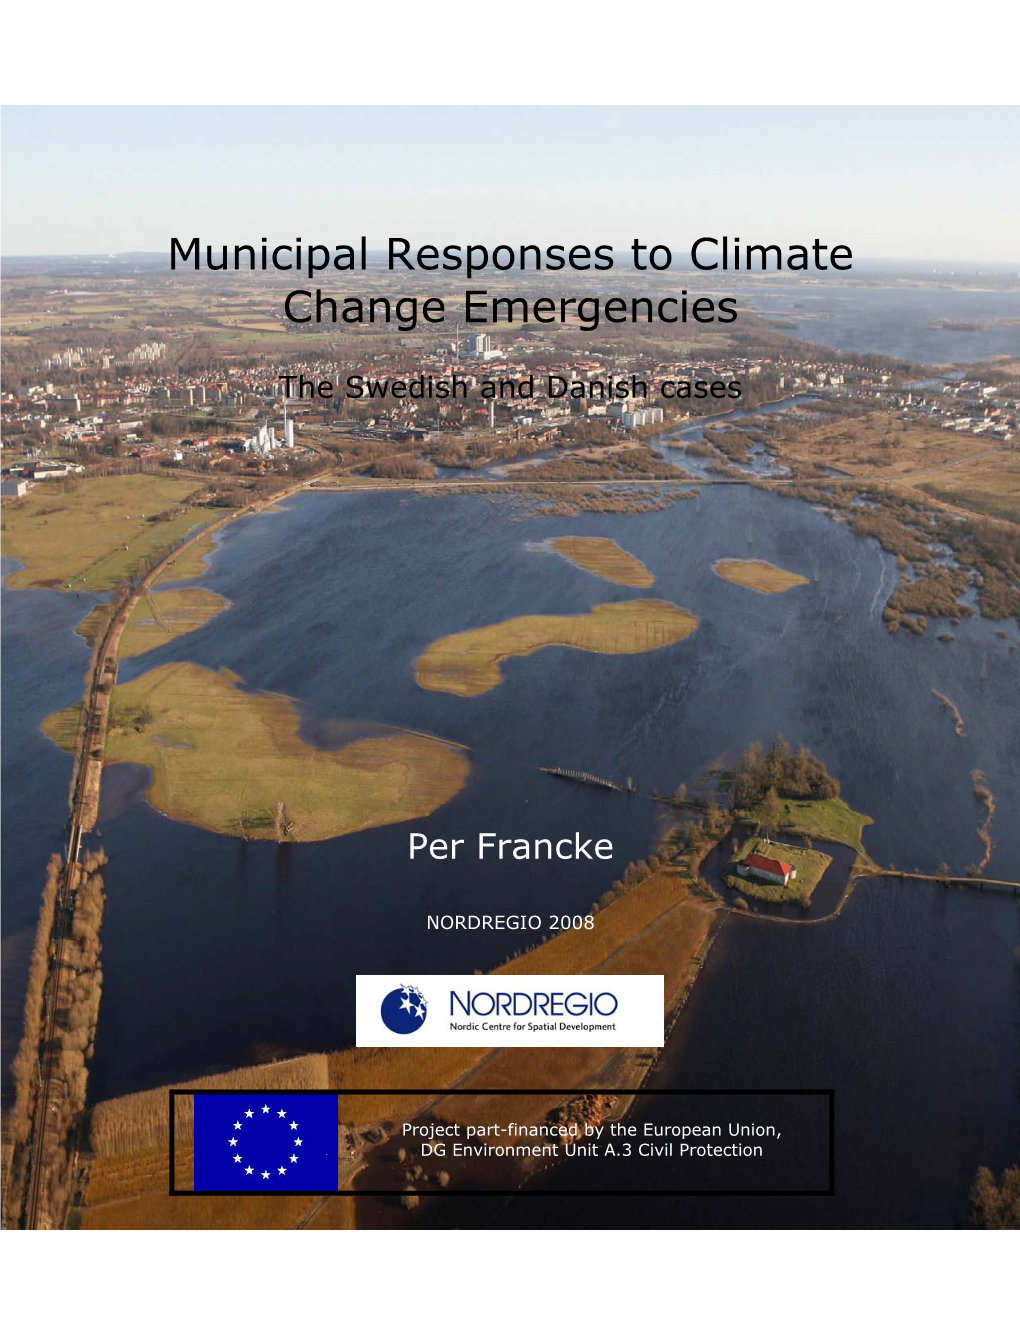 Case Study Reports with Perspectives on the Municipal Responses Corresponding to Their Research Interest